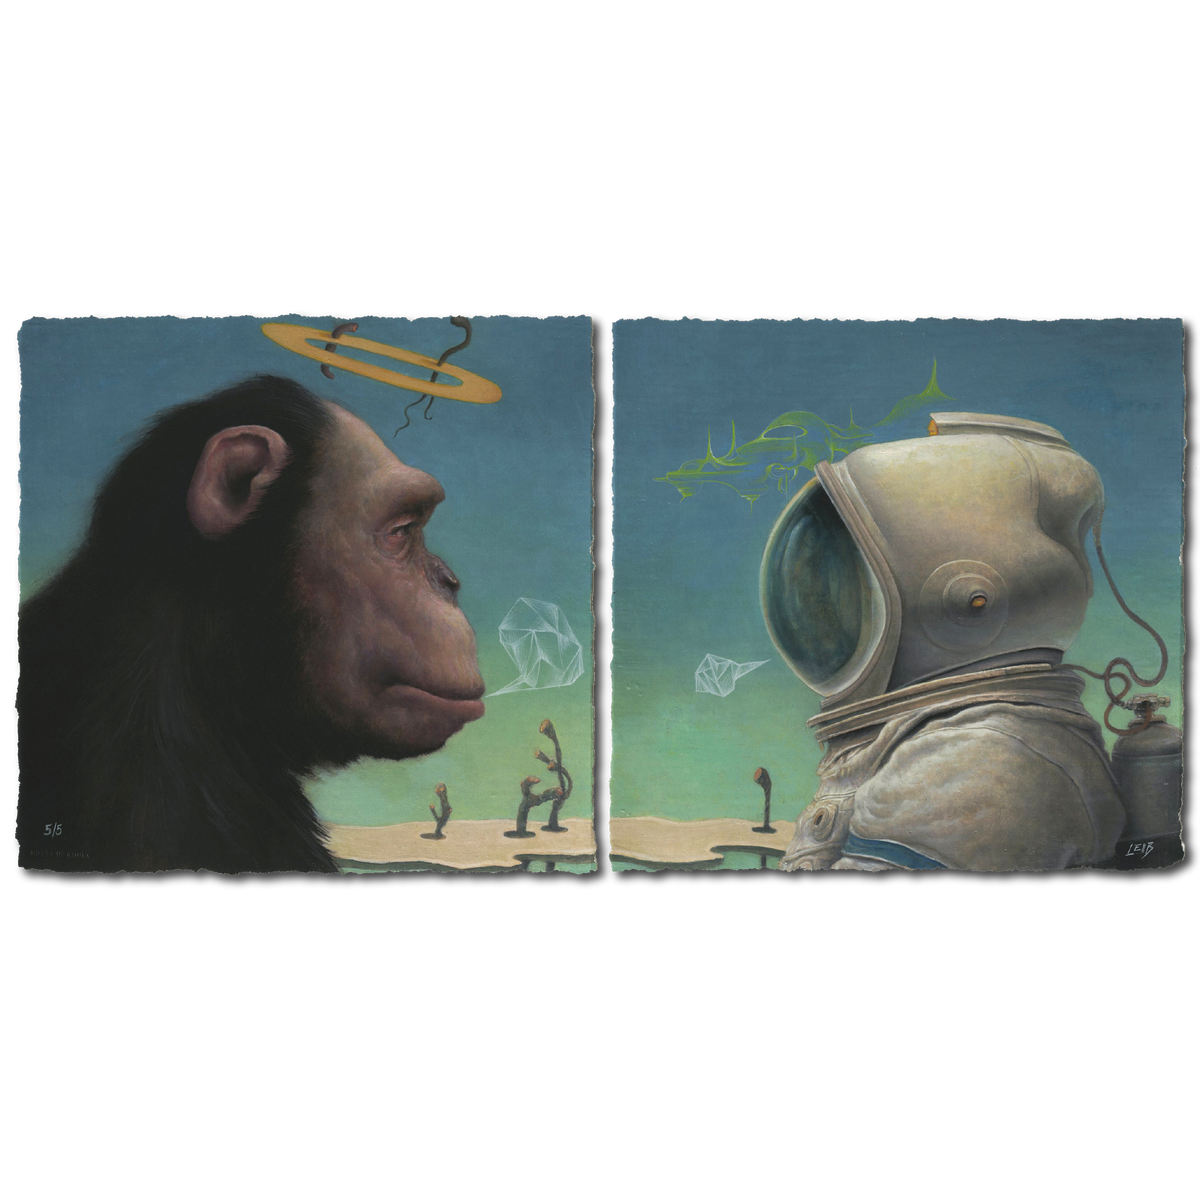 Chris Leib &quot;Uncommon Agreement&quot; - Hand-Embellished Diptych Edition #5/5 - 17 x 17&quot; Each